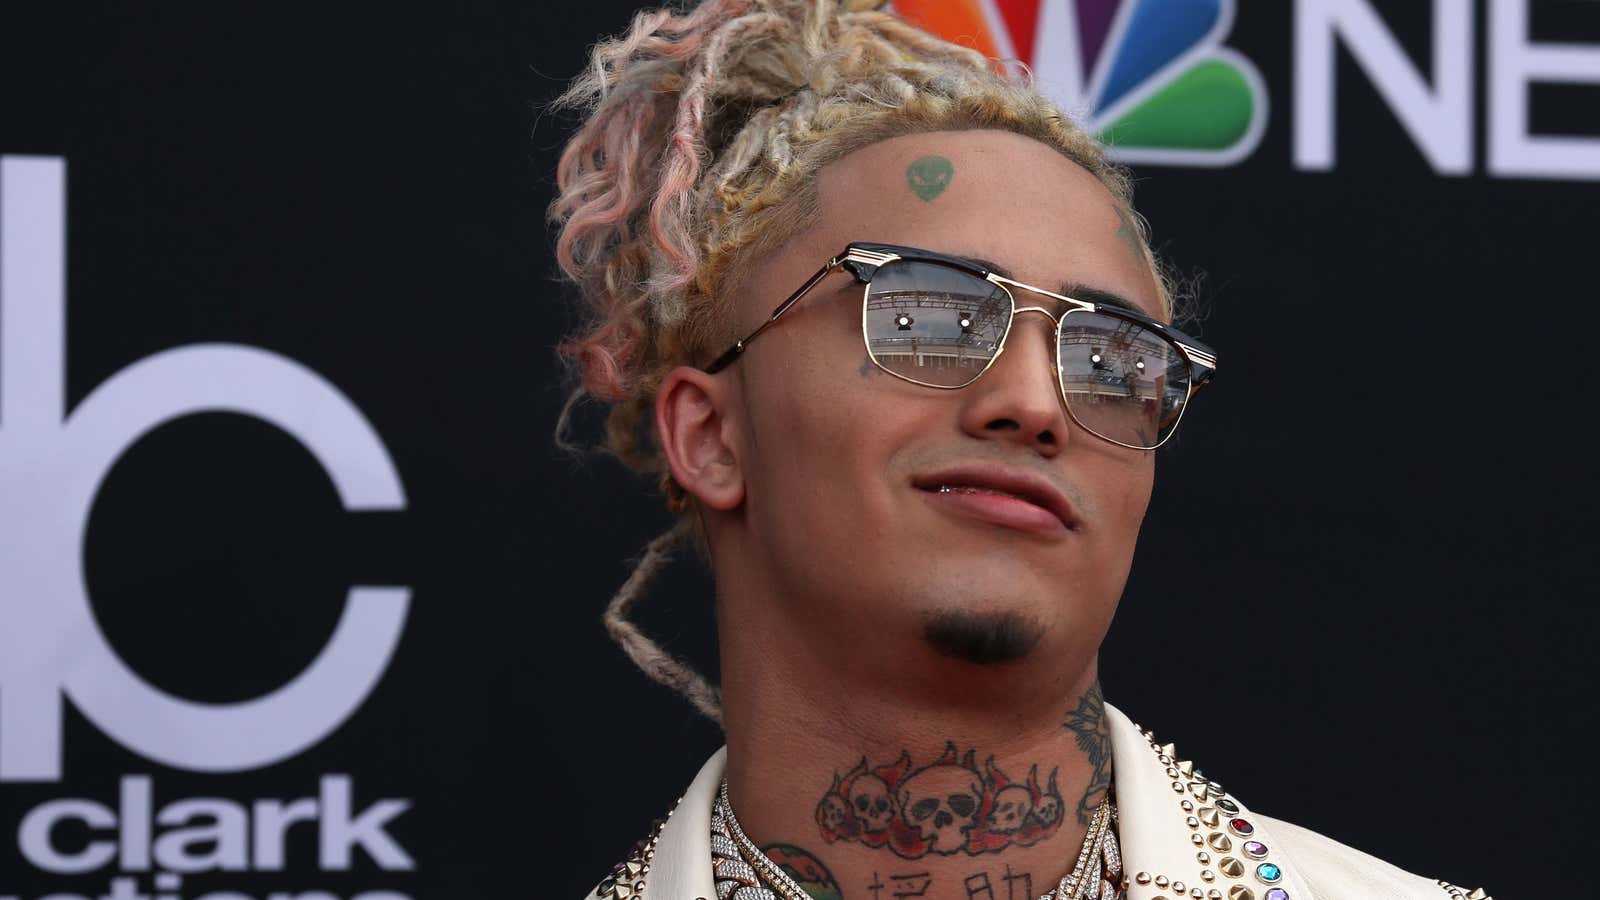 Lil Pump pumps out a lot of short songs.